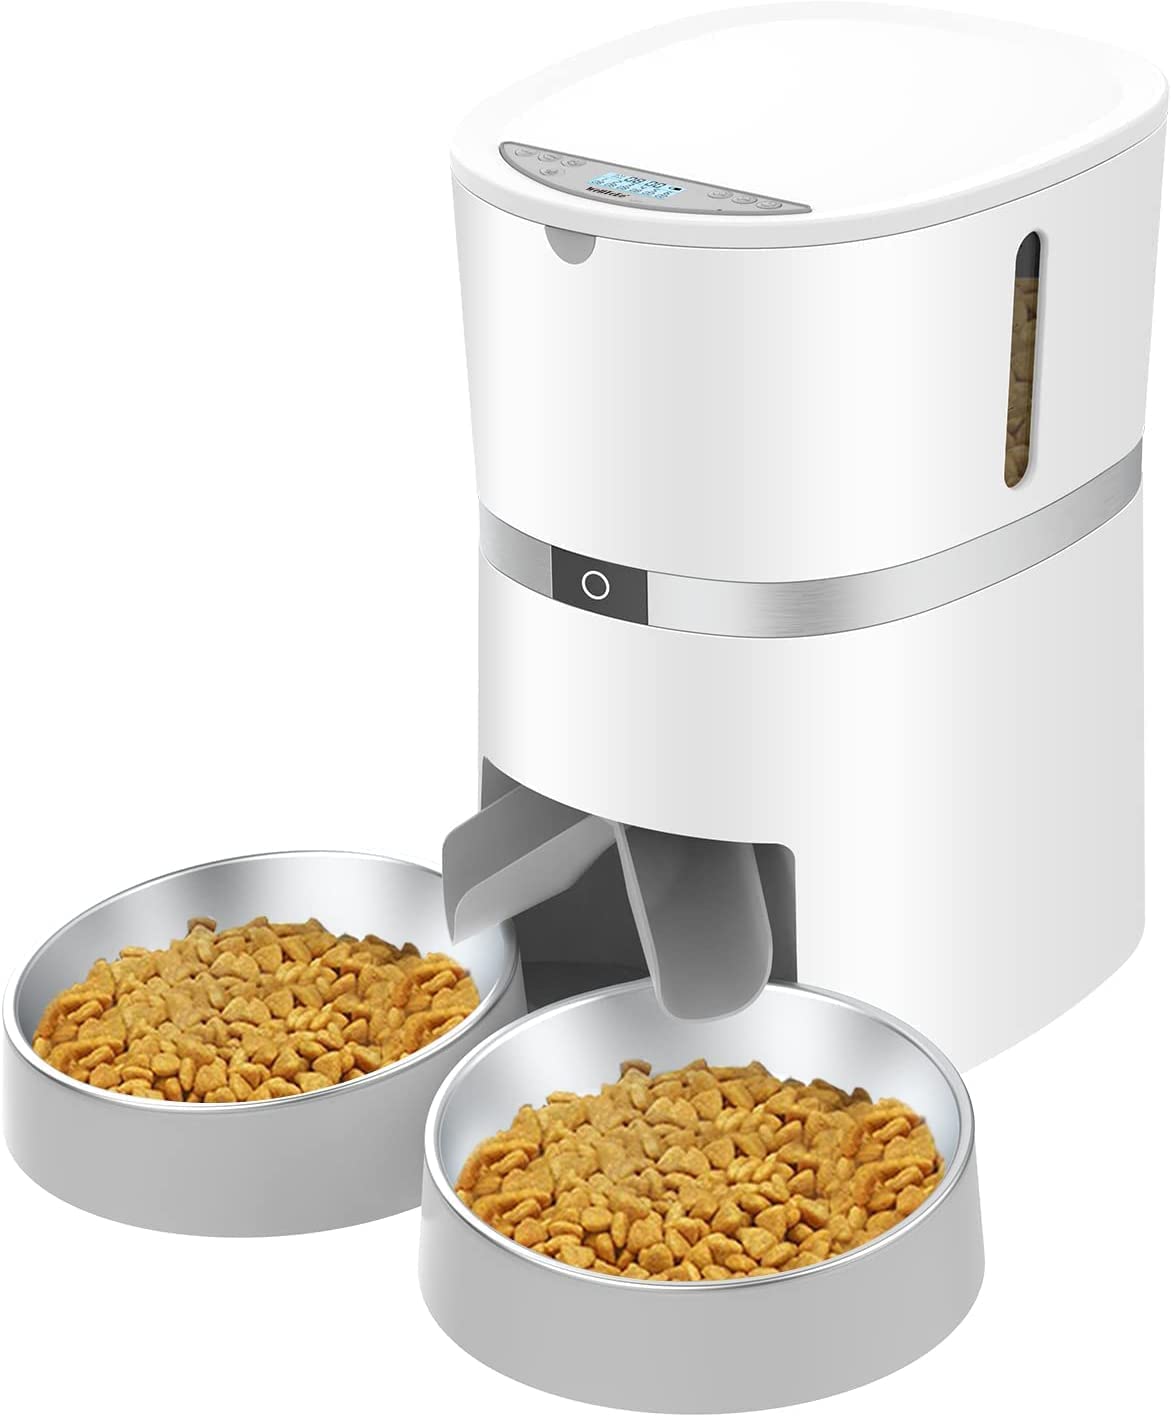 9. WellToBe Automatic Cat Feeder for Two Cats